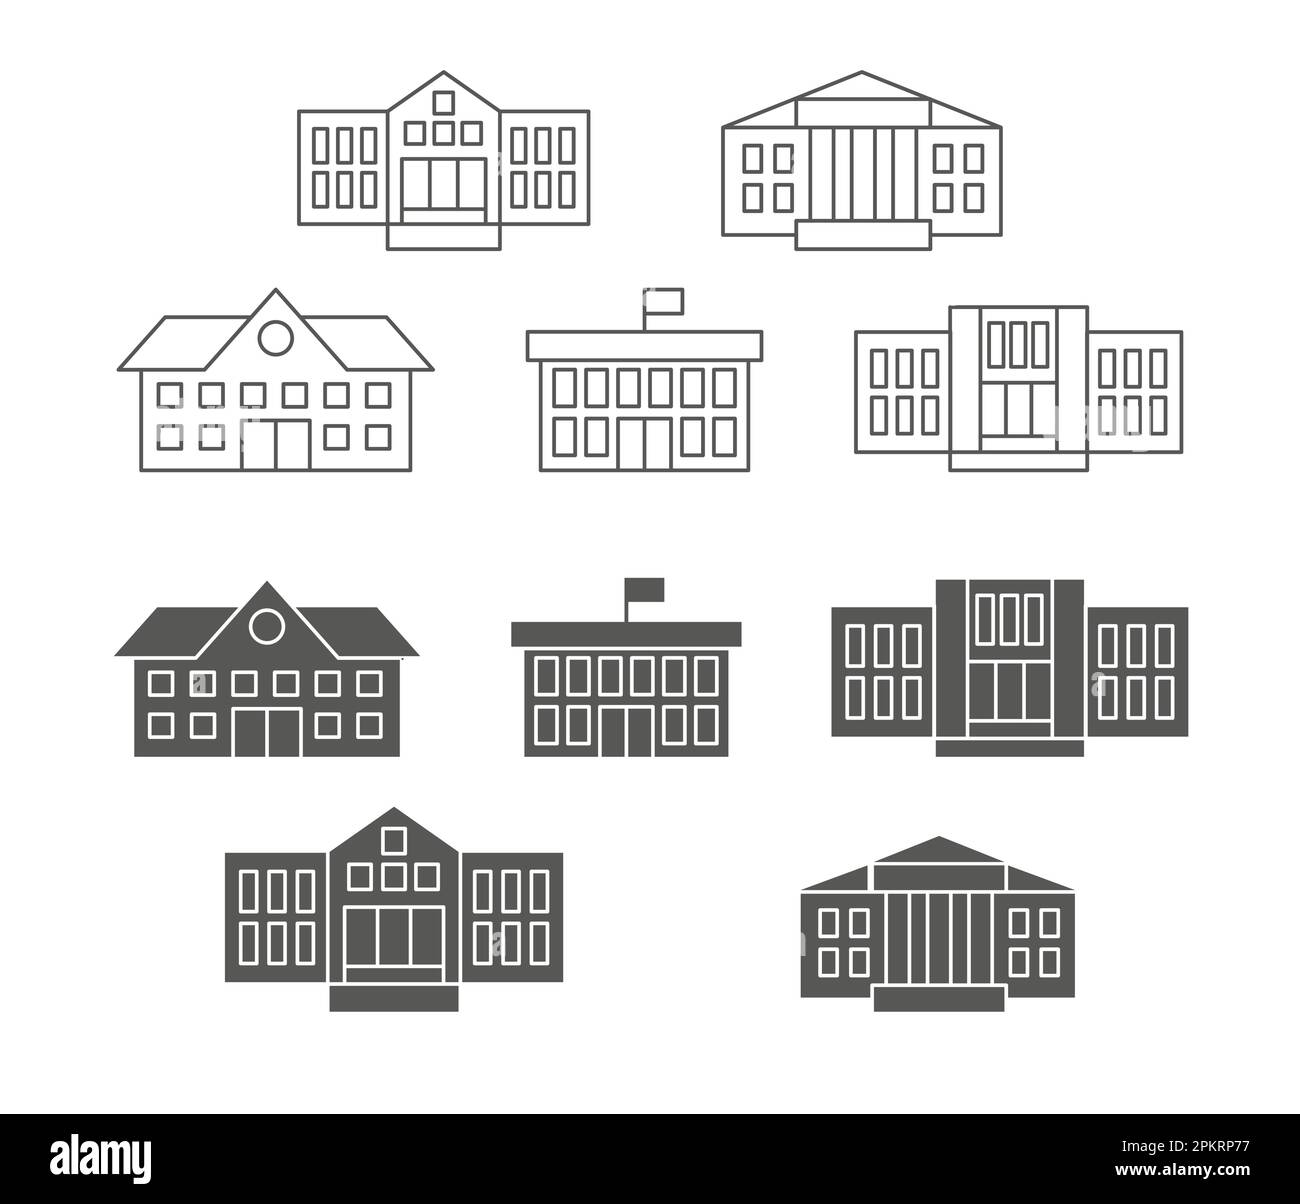 School education. University campus. College icons. High public buildings. Elementary facility. Library and preschool studying. Line or silhouette sch Stock Vector